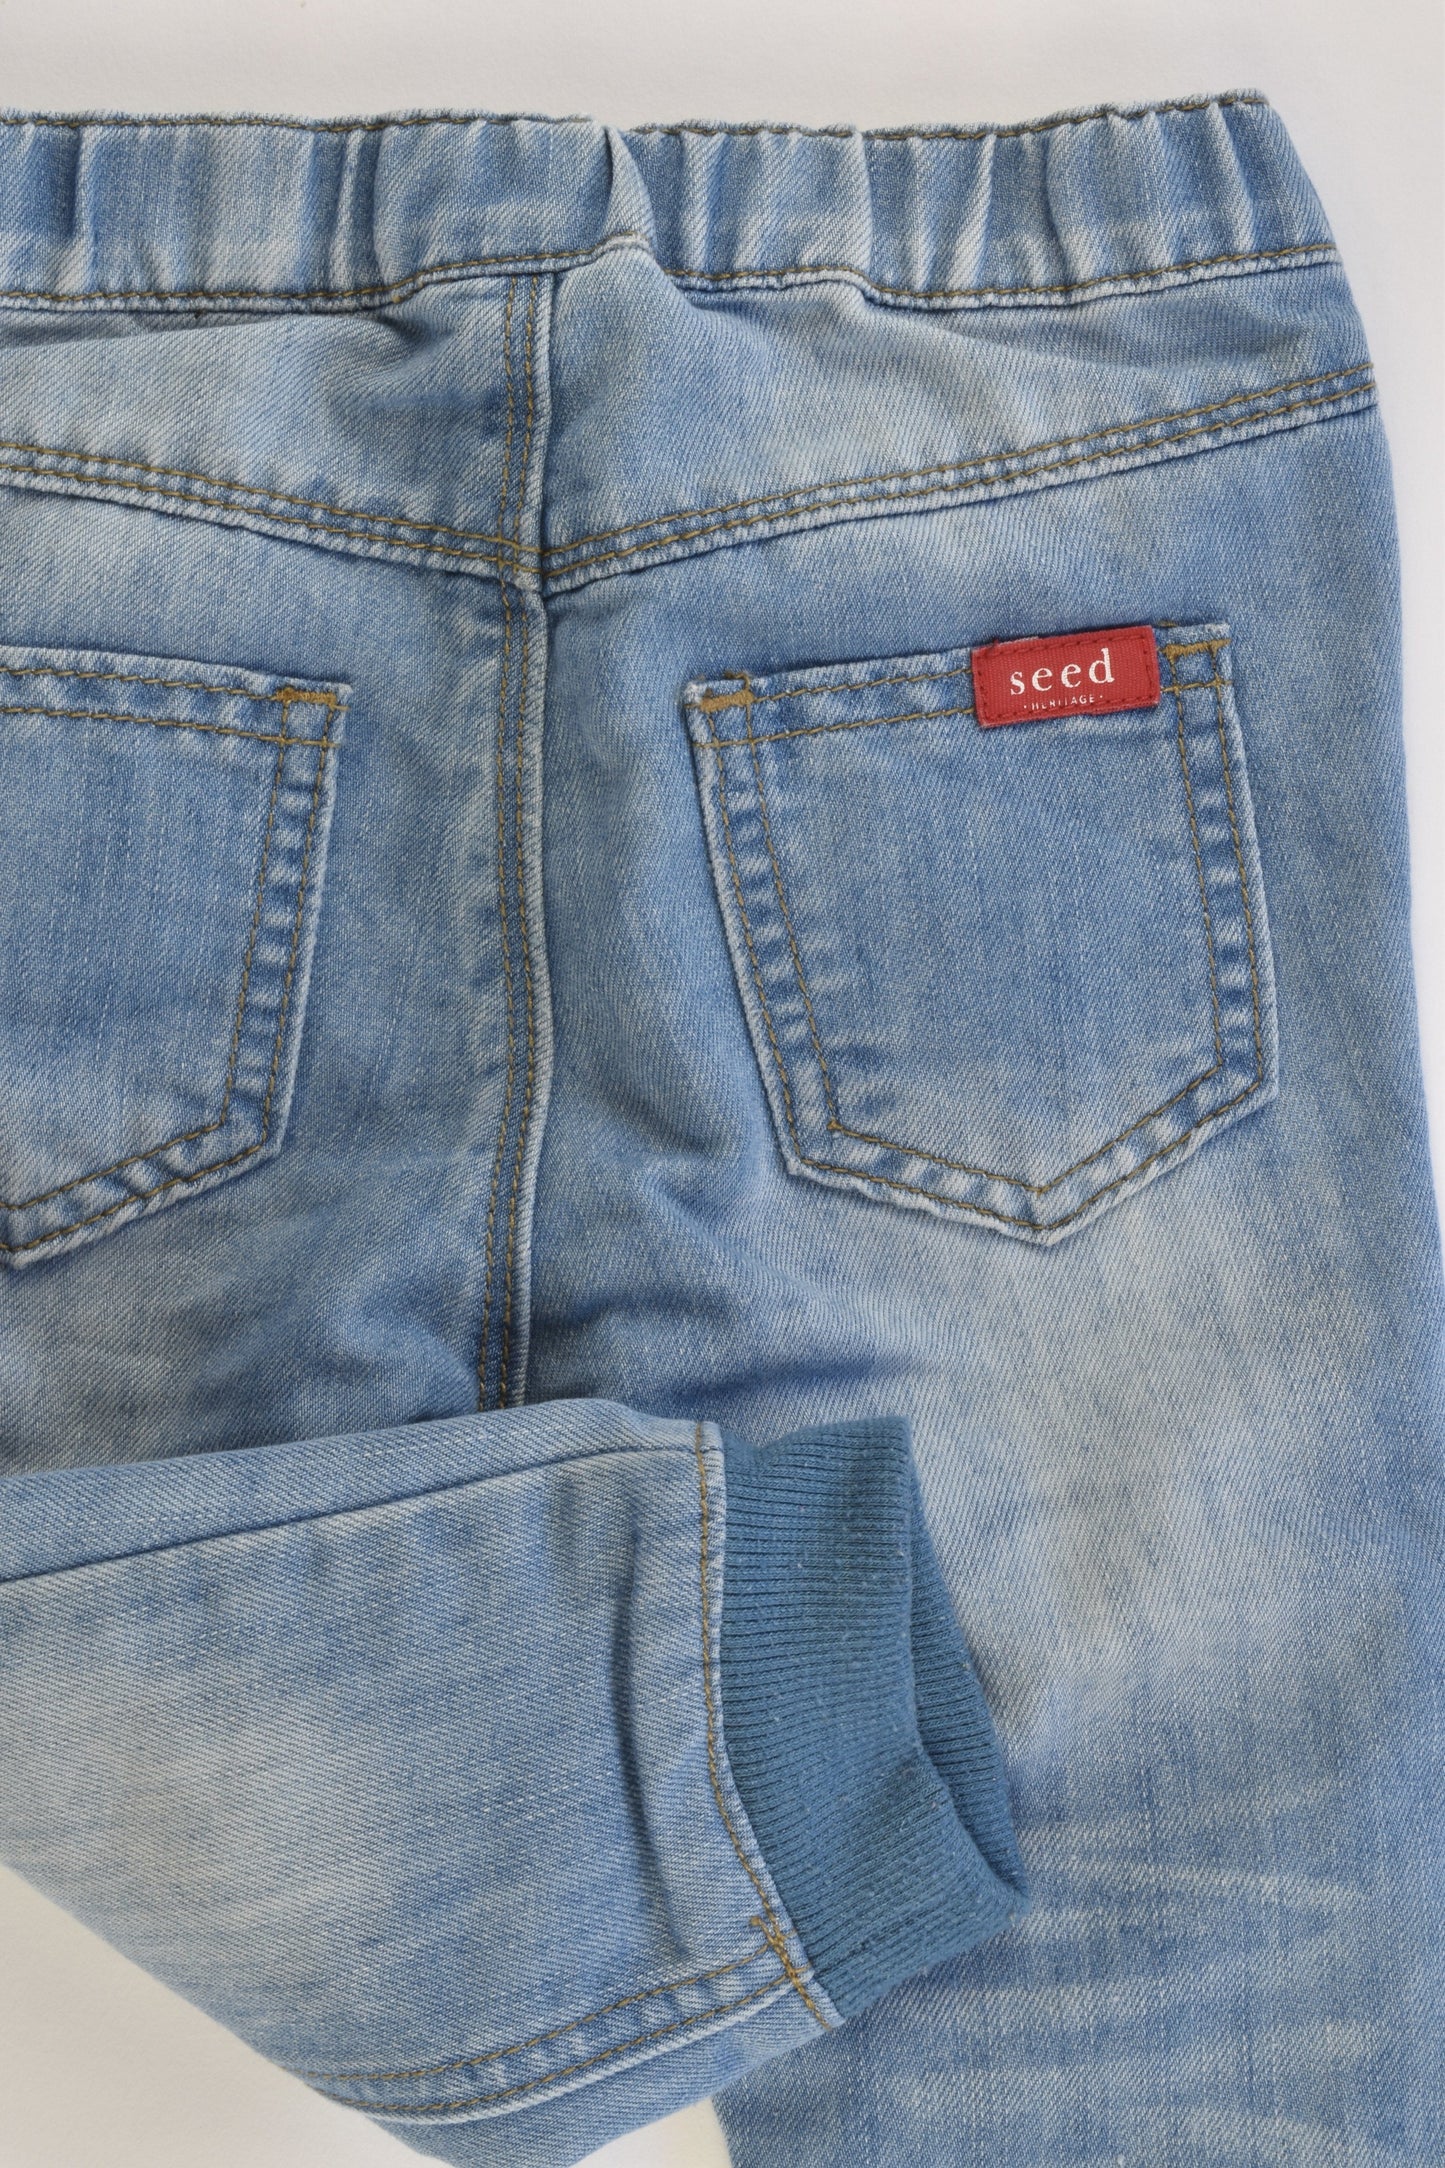 Seed Heritage Size 12-18 months (1) Soft Denim Pants